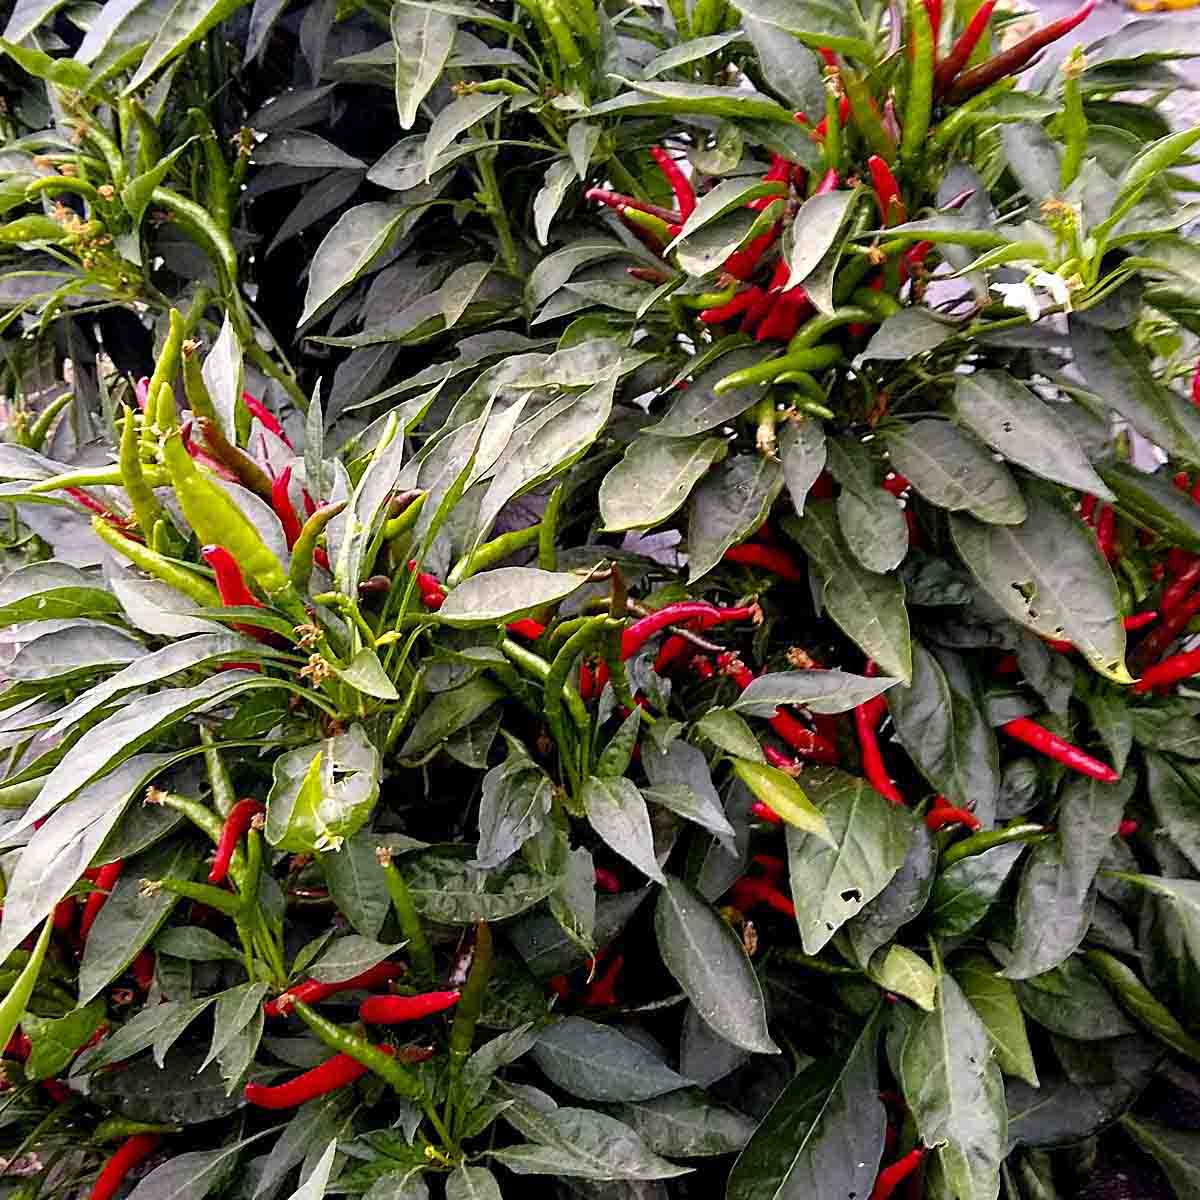 Bright red peppers poke out of deep green-purple leaves.